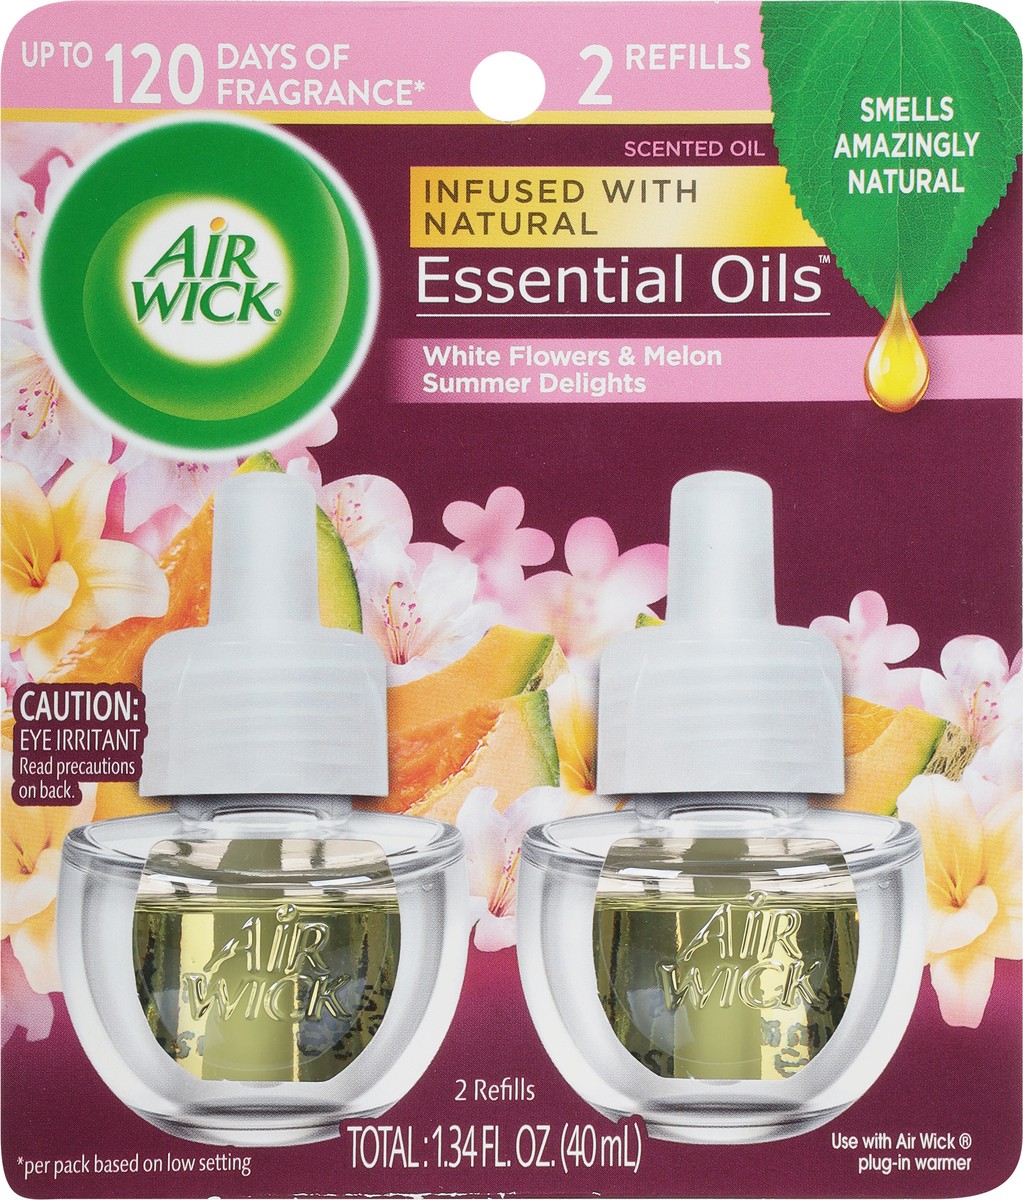 slide 6 of 9, Air Wick Life Scents Scented Oil Plug in Air Freshener Refills, Summer Delights With White Flowers, Melon & Vanilla Scent, 2 ct; 0.67 fl oz